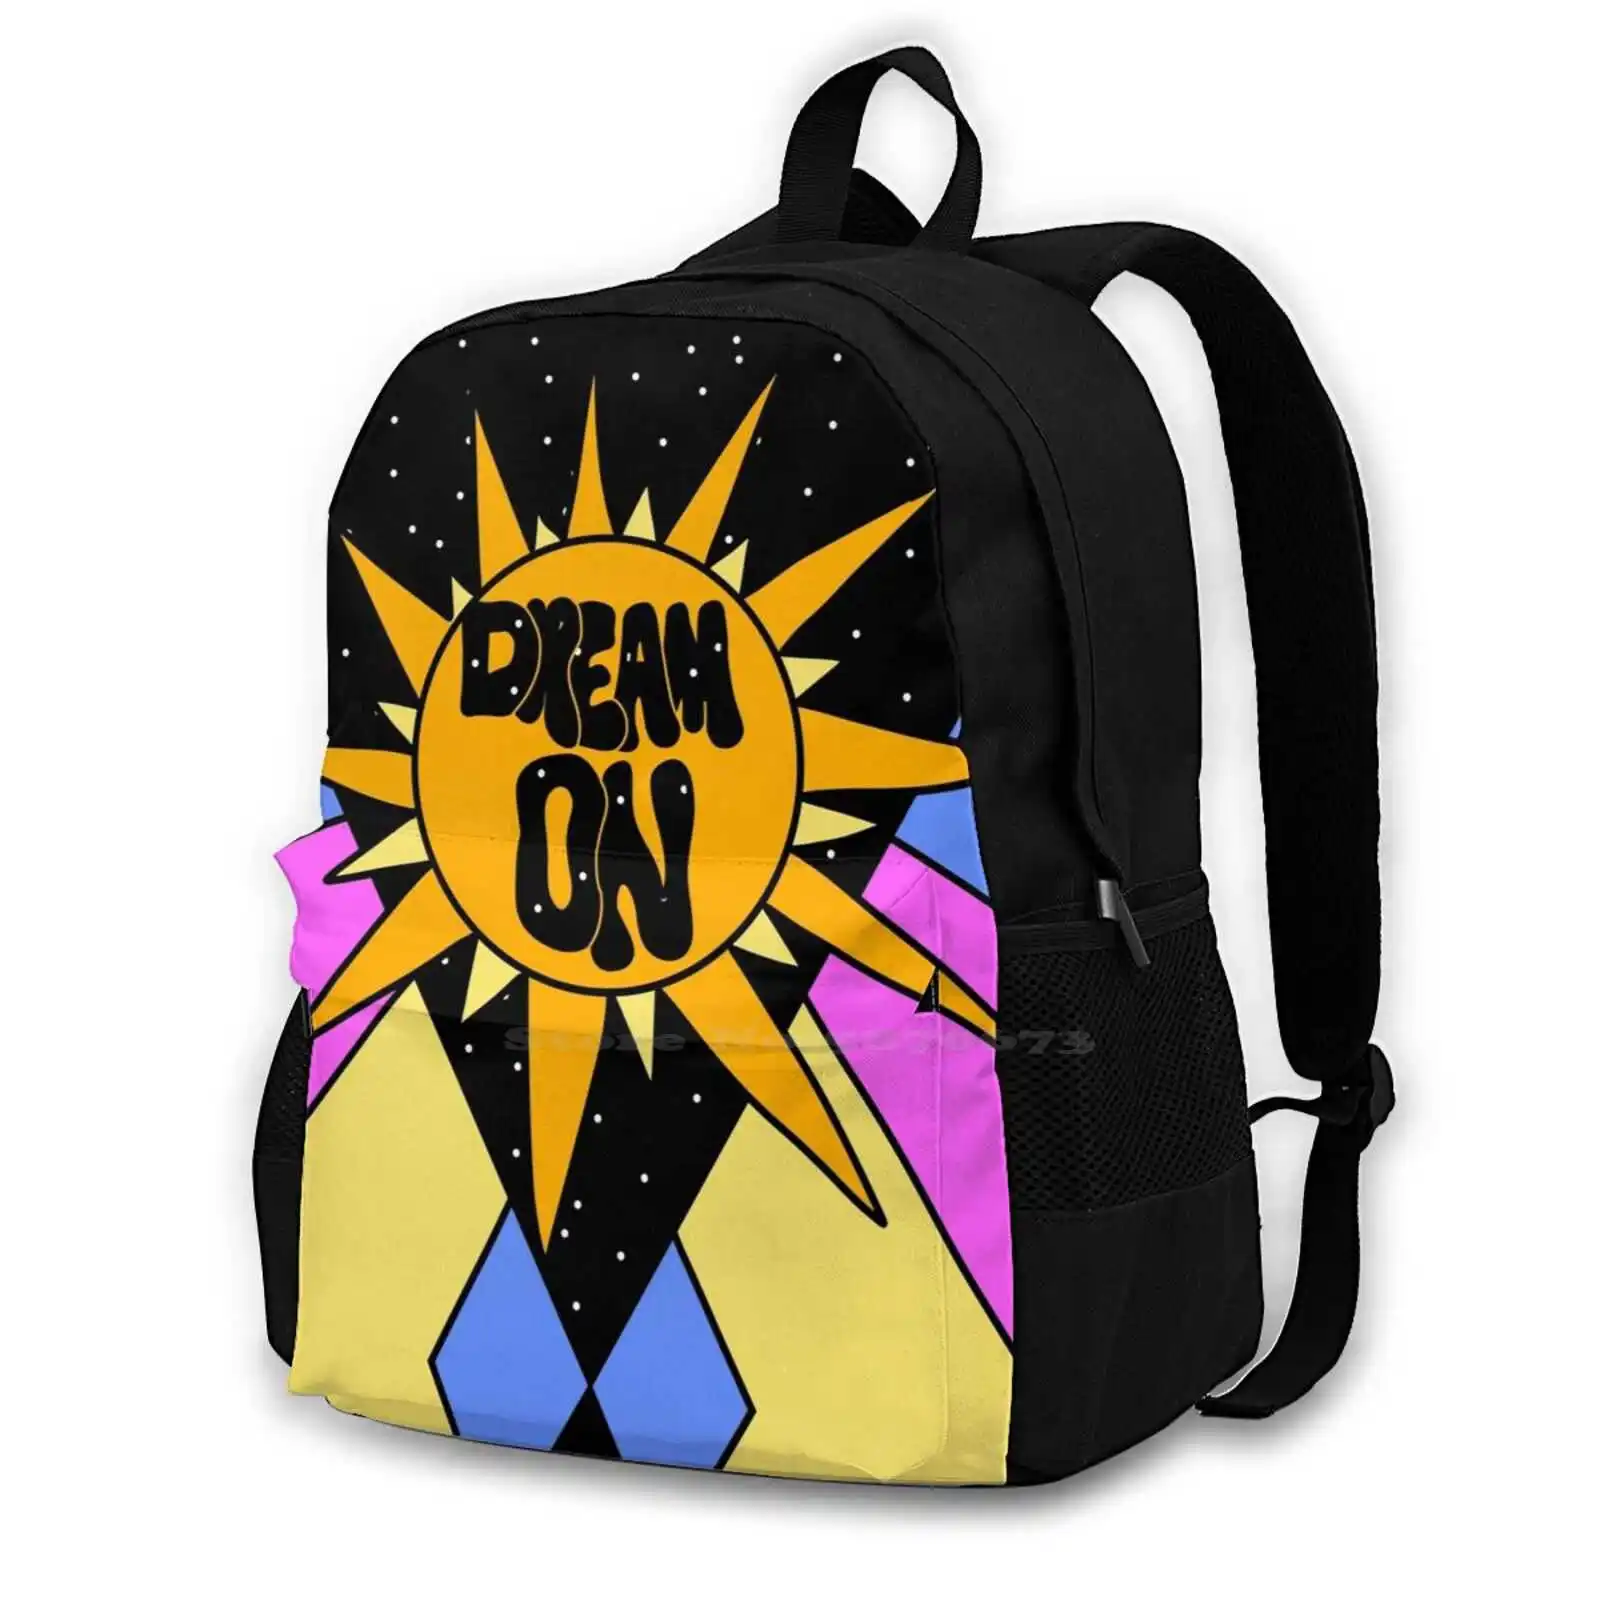 

Dream On (Color) Backpacks For Men Women Teenagers Girls Bags Dream On Positivity Positive Vibes Vibe 70S 1970S Bands Songs